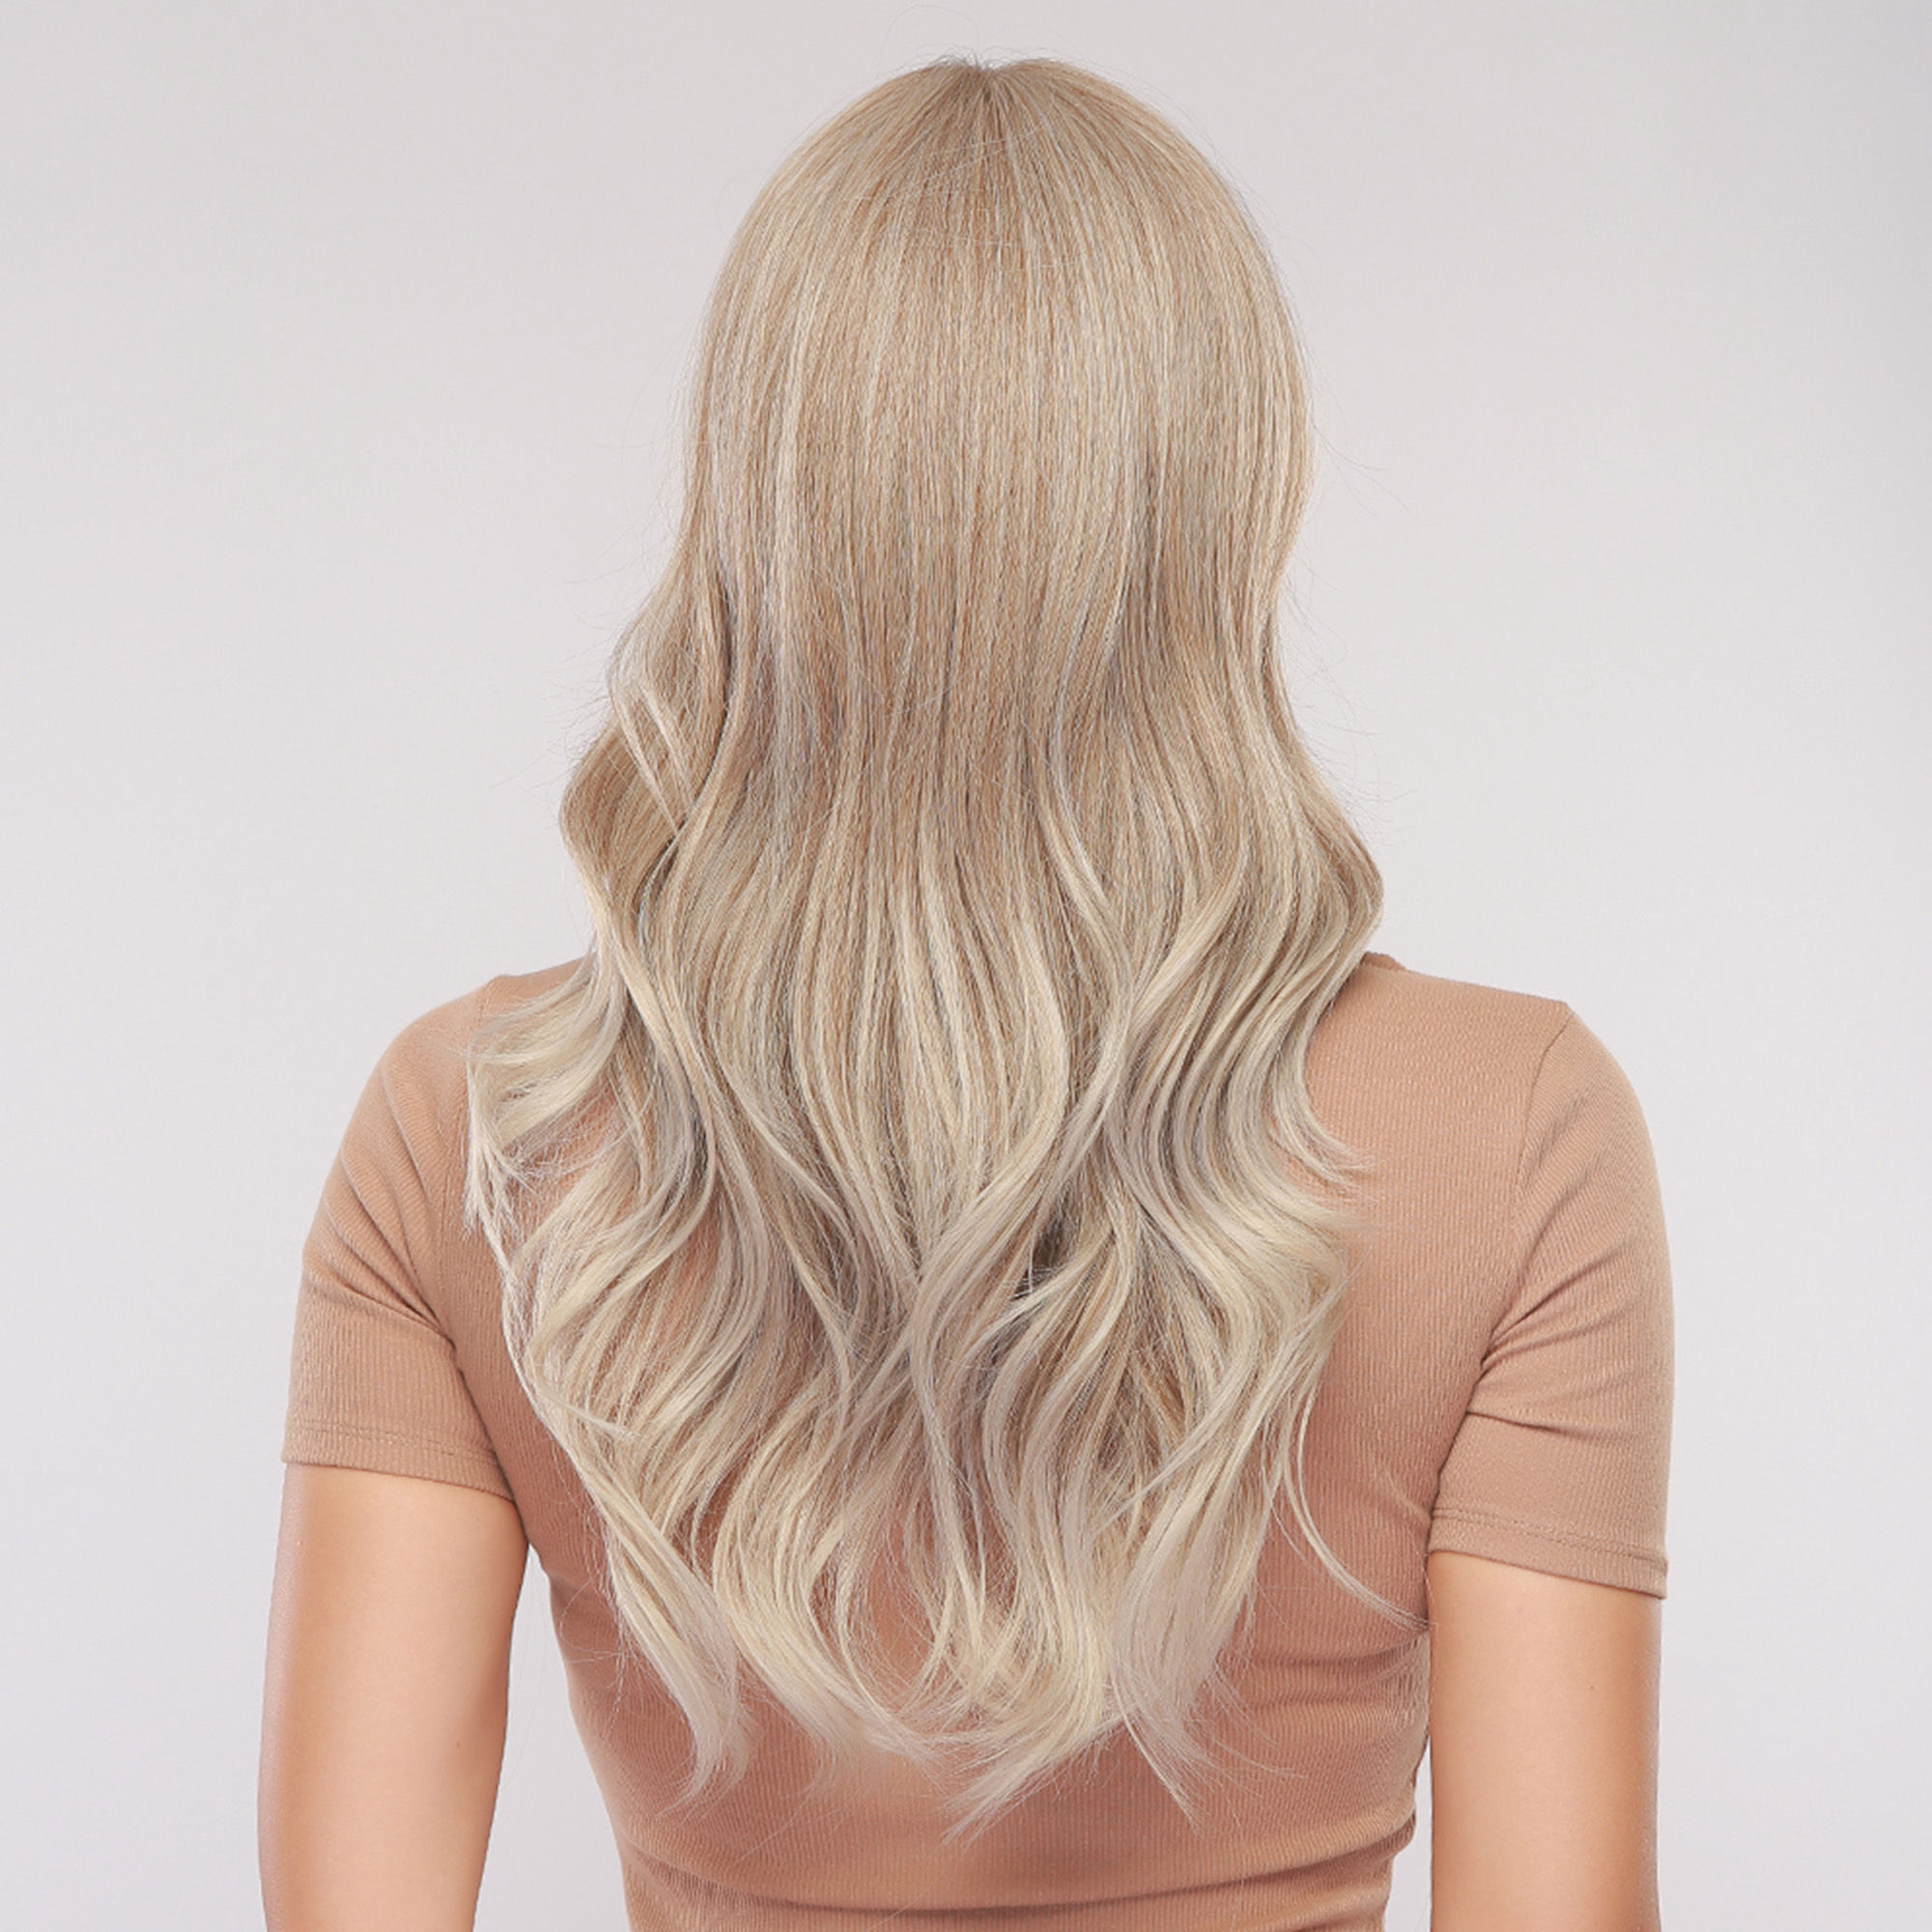 Silver Gray Long Wavy Synthetic Hair Wig With Bangs 24 Inches